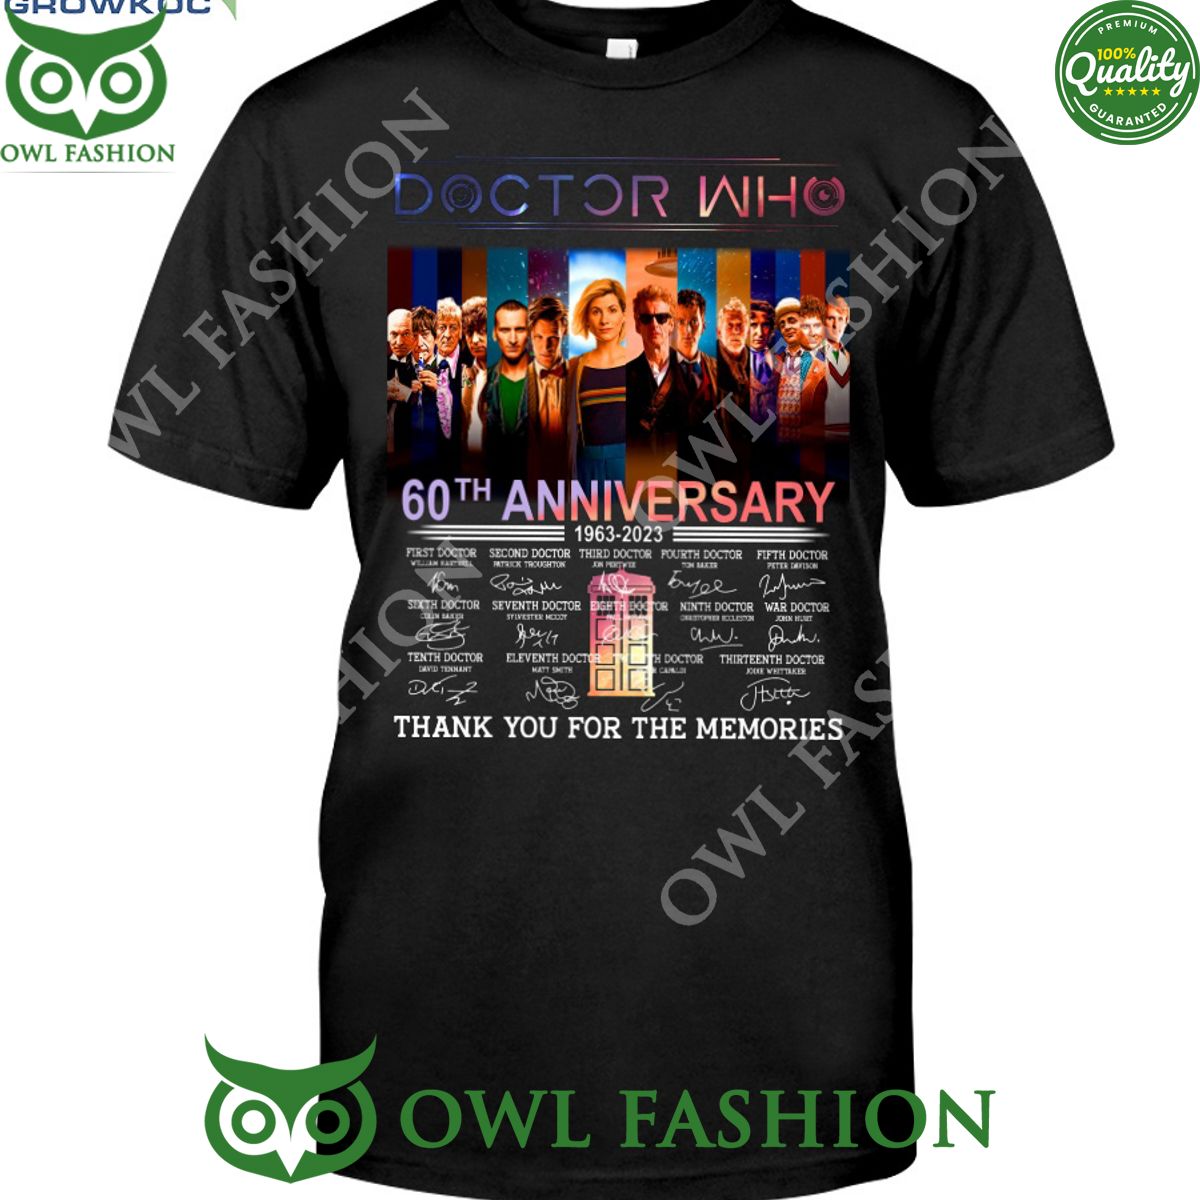 Doctor Who 60th Anniversary 1963-2023 Thank You For The Memories T Shirt